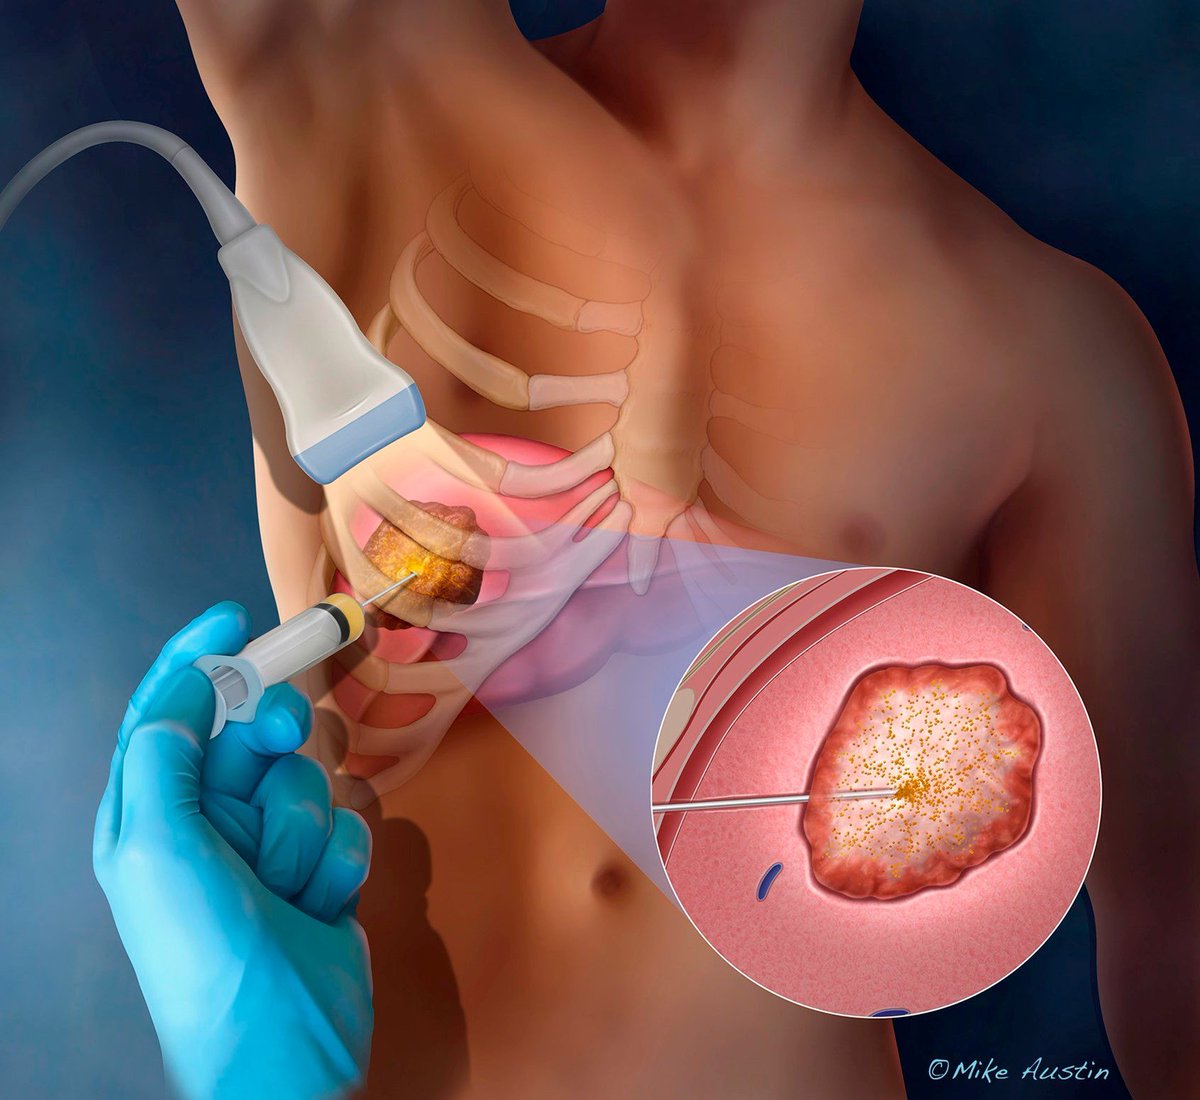 Cover illustration by Mike Austin depicting a substance that's injected into a liver tumor for tumor ablation. Explore more by Mike: buff.ly/3ngt8n8 #tumor #ablation #oncology #thoracicsurgery #coverillustration #medical #illustration #medicalillustration #sciart #3D